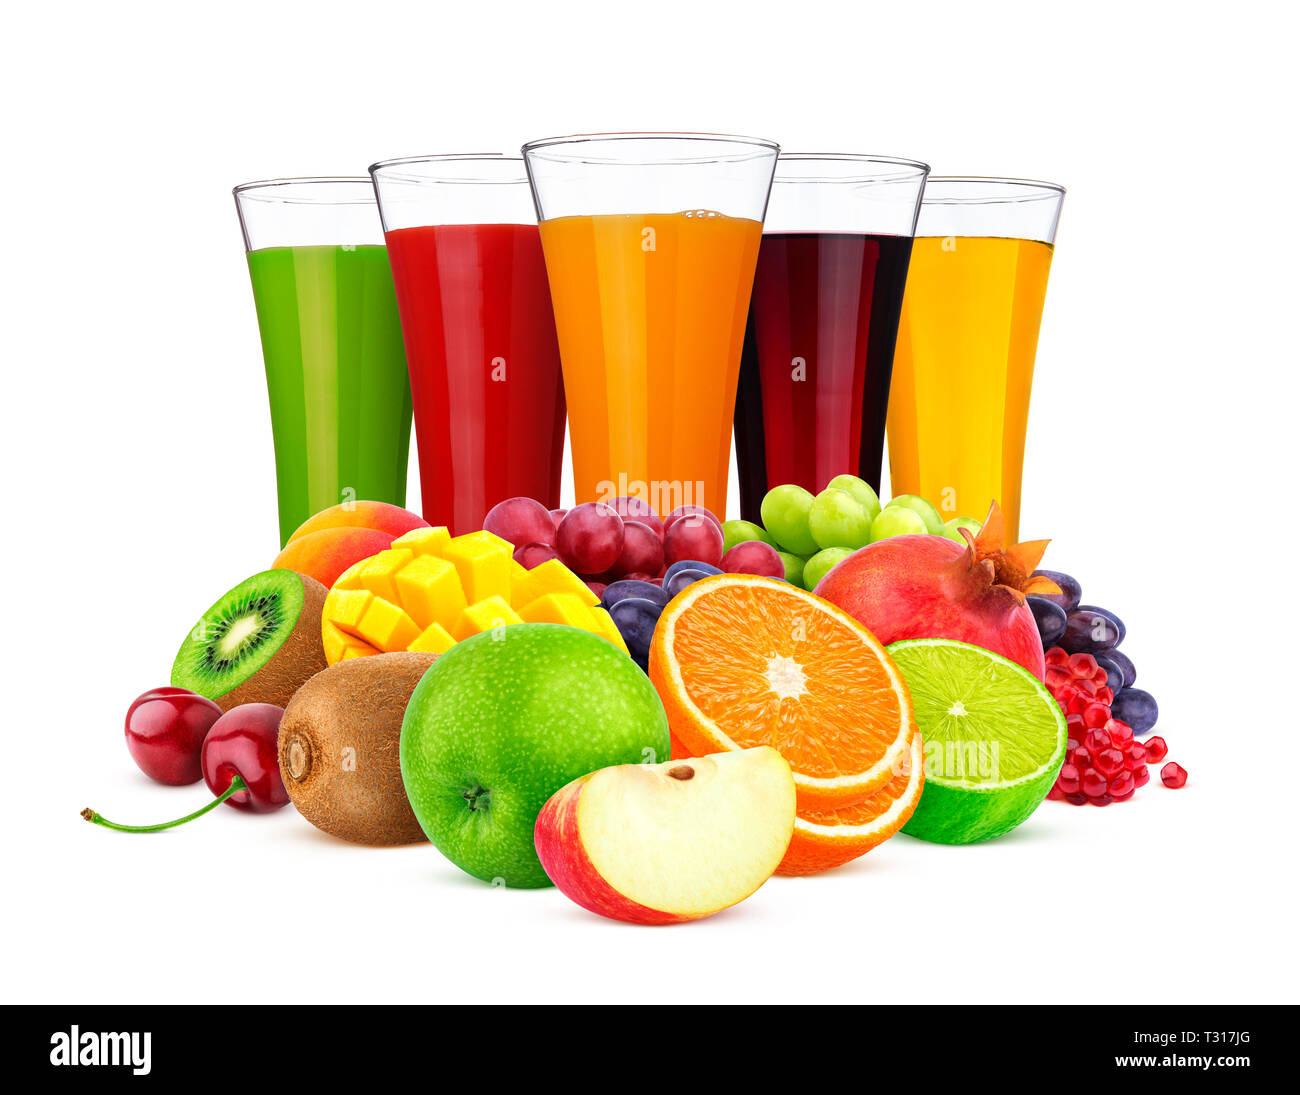 Fruit juice concept, glasses of different juices and pile of fruits and berries isolated on white background, collection of fresh and healthy drinks Stock Photo